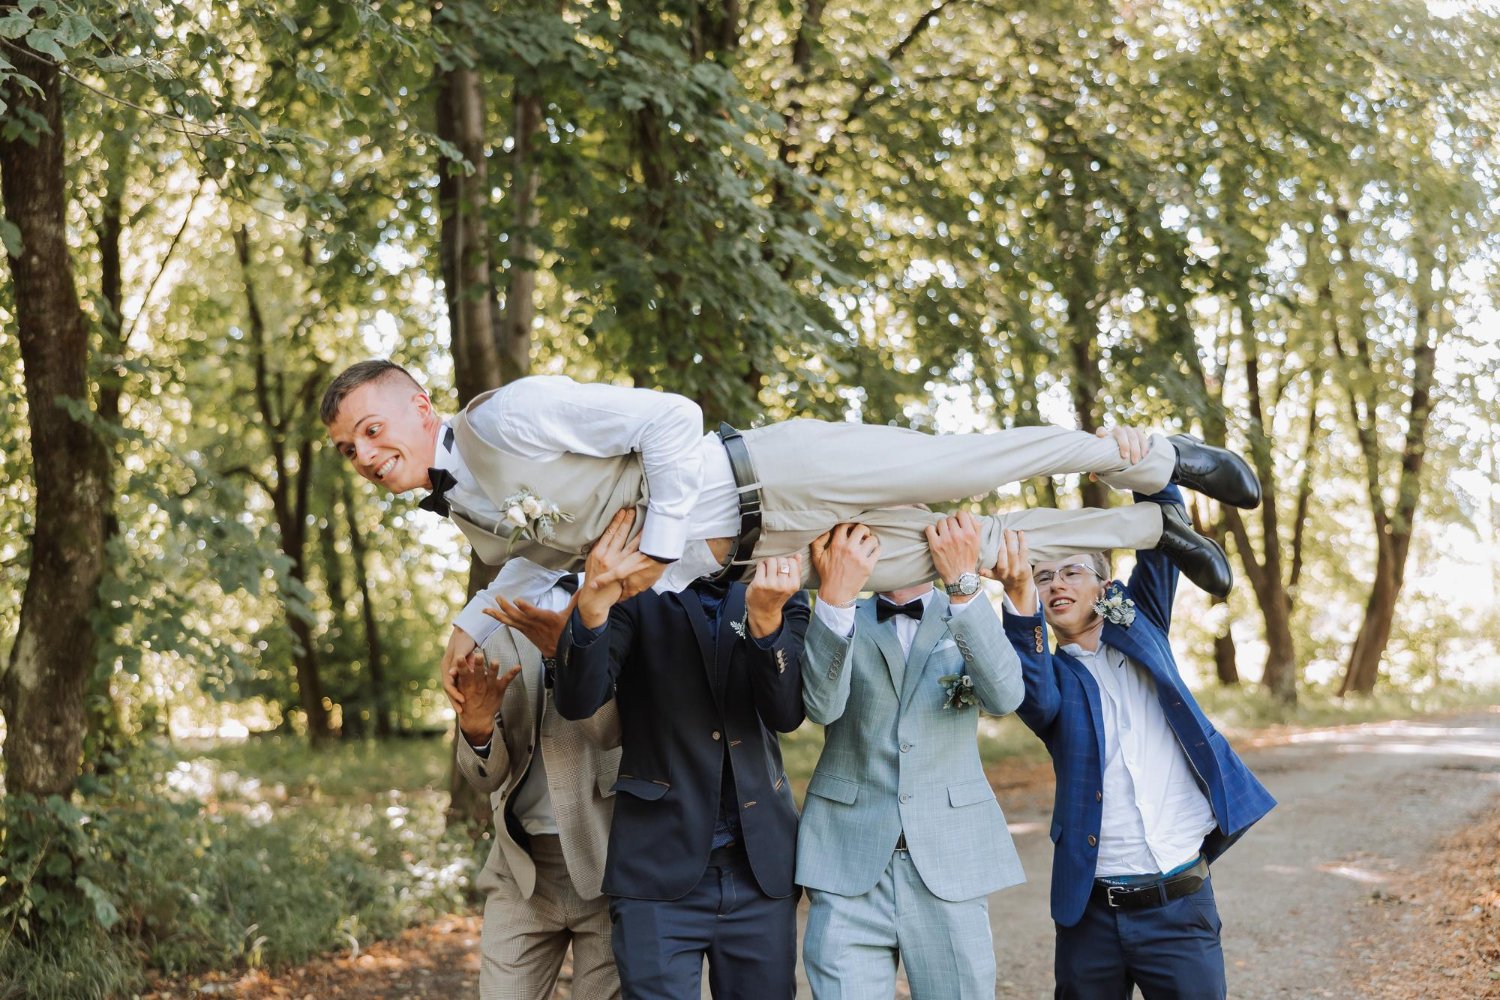 a group of friends lifts the happy groom to the top the company of the groom's